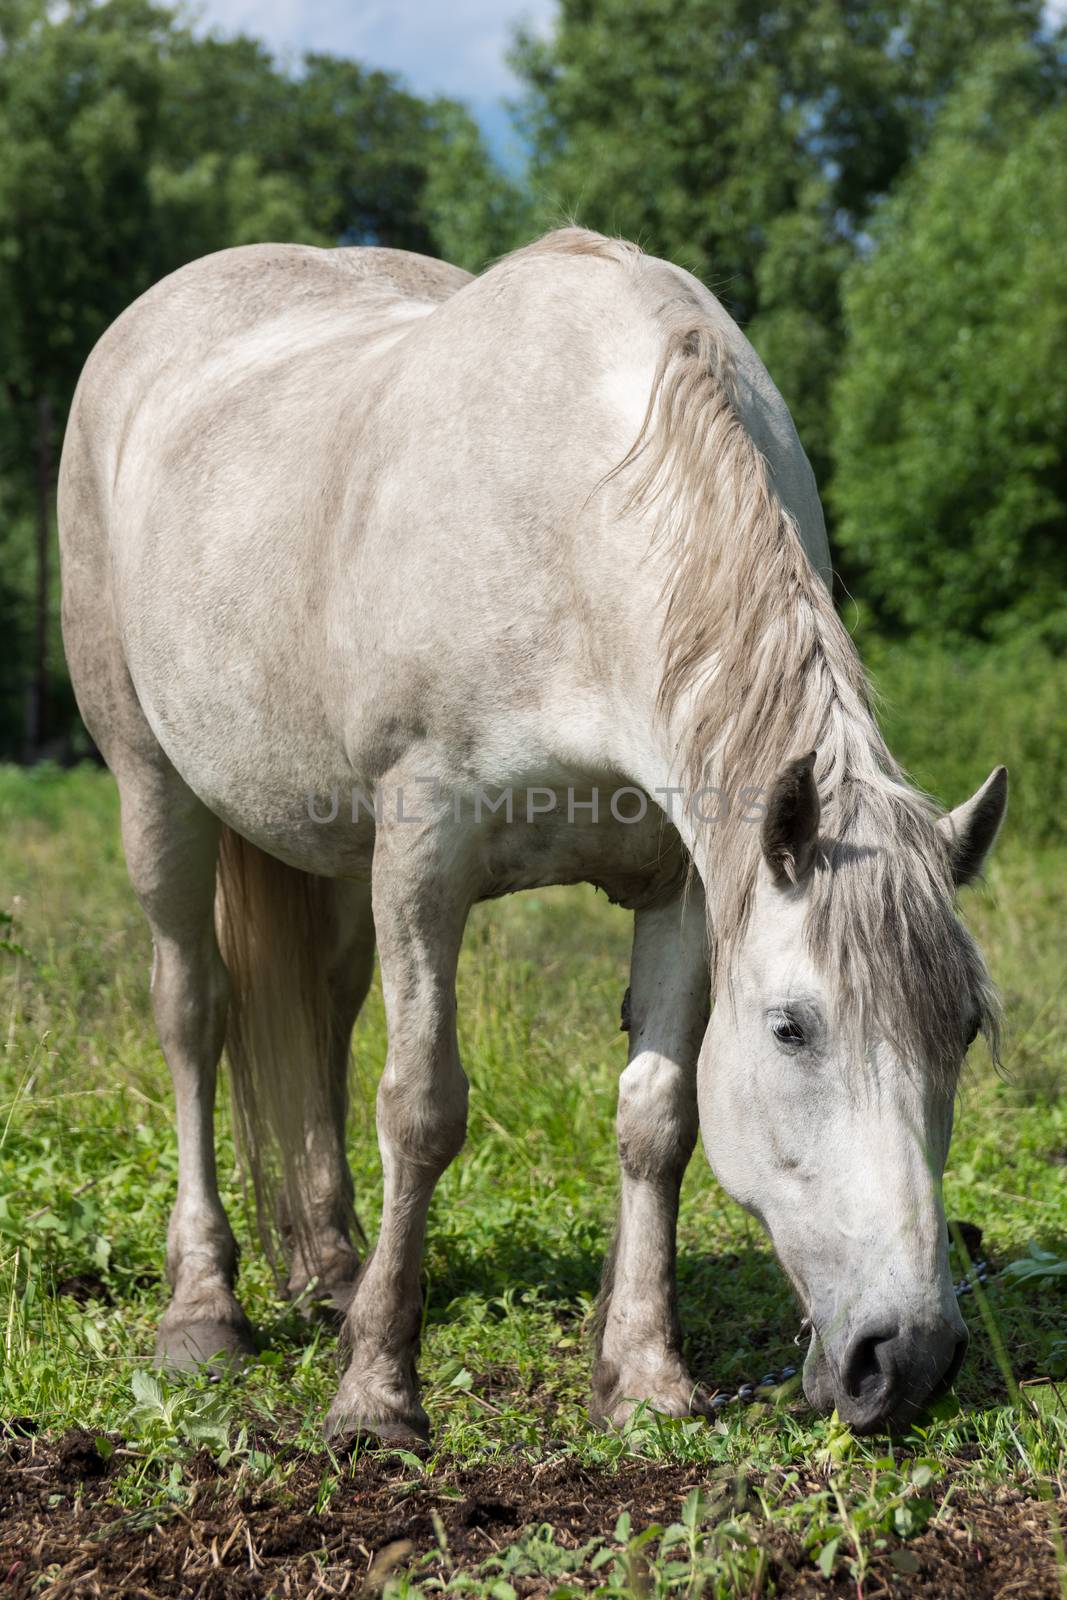 The photo shows a horse in the meadow